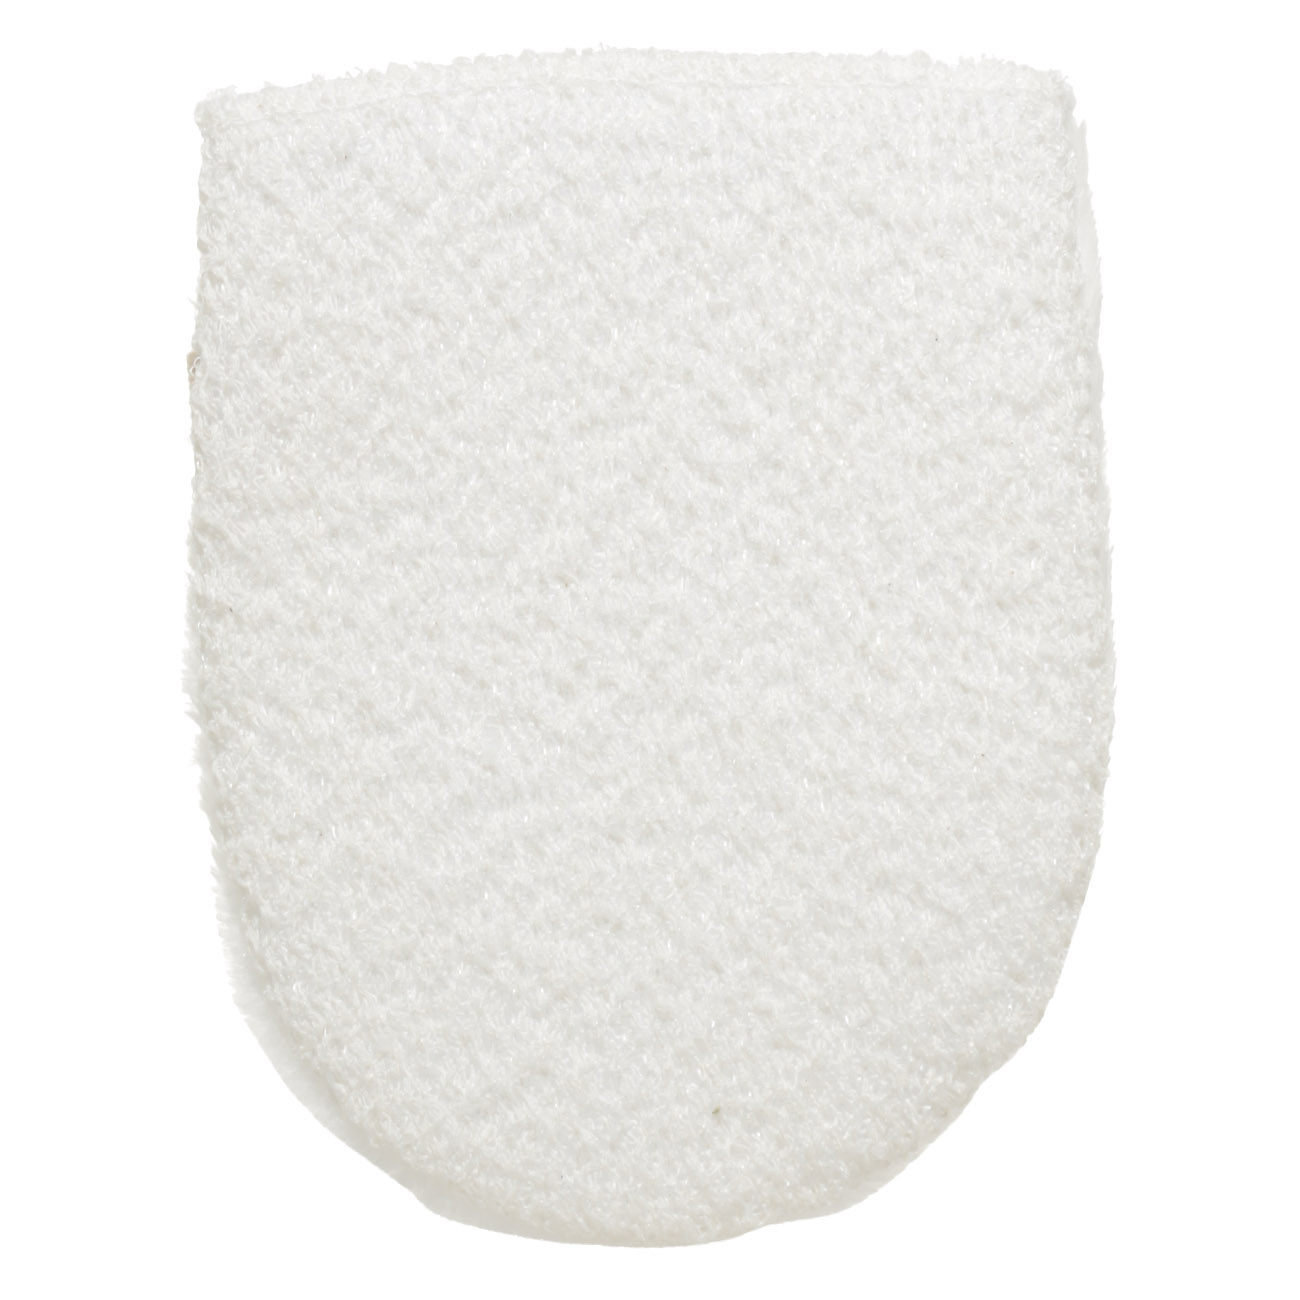 Face wash mitten, 12x9 cm, double-sided, polyester, milk, Unique spa изображение № 2